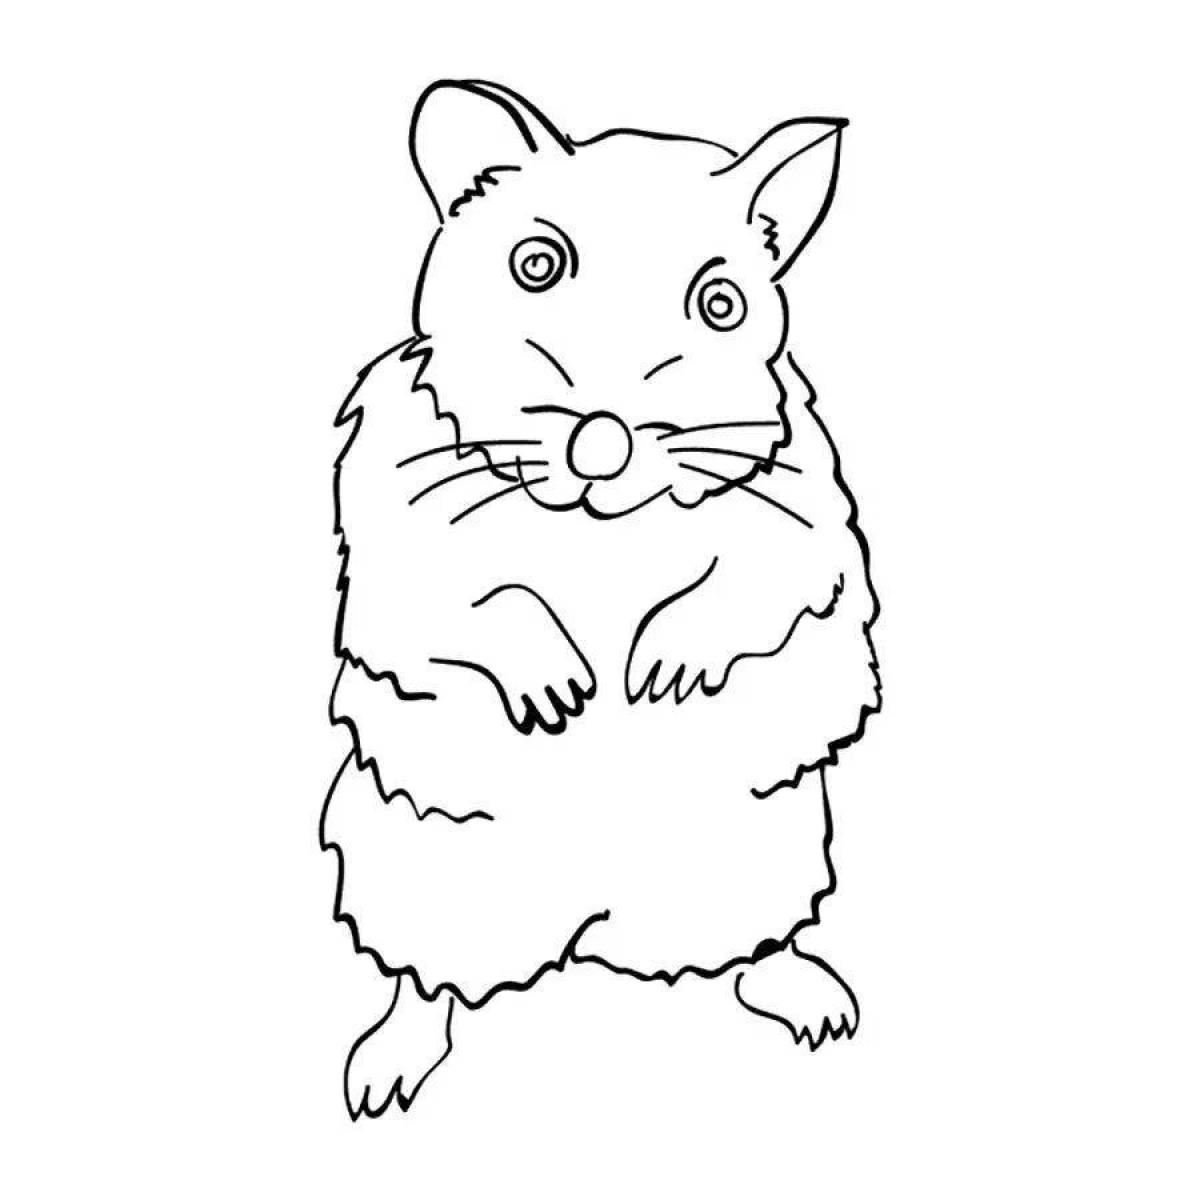 Great coloring pages for hamsters